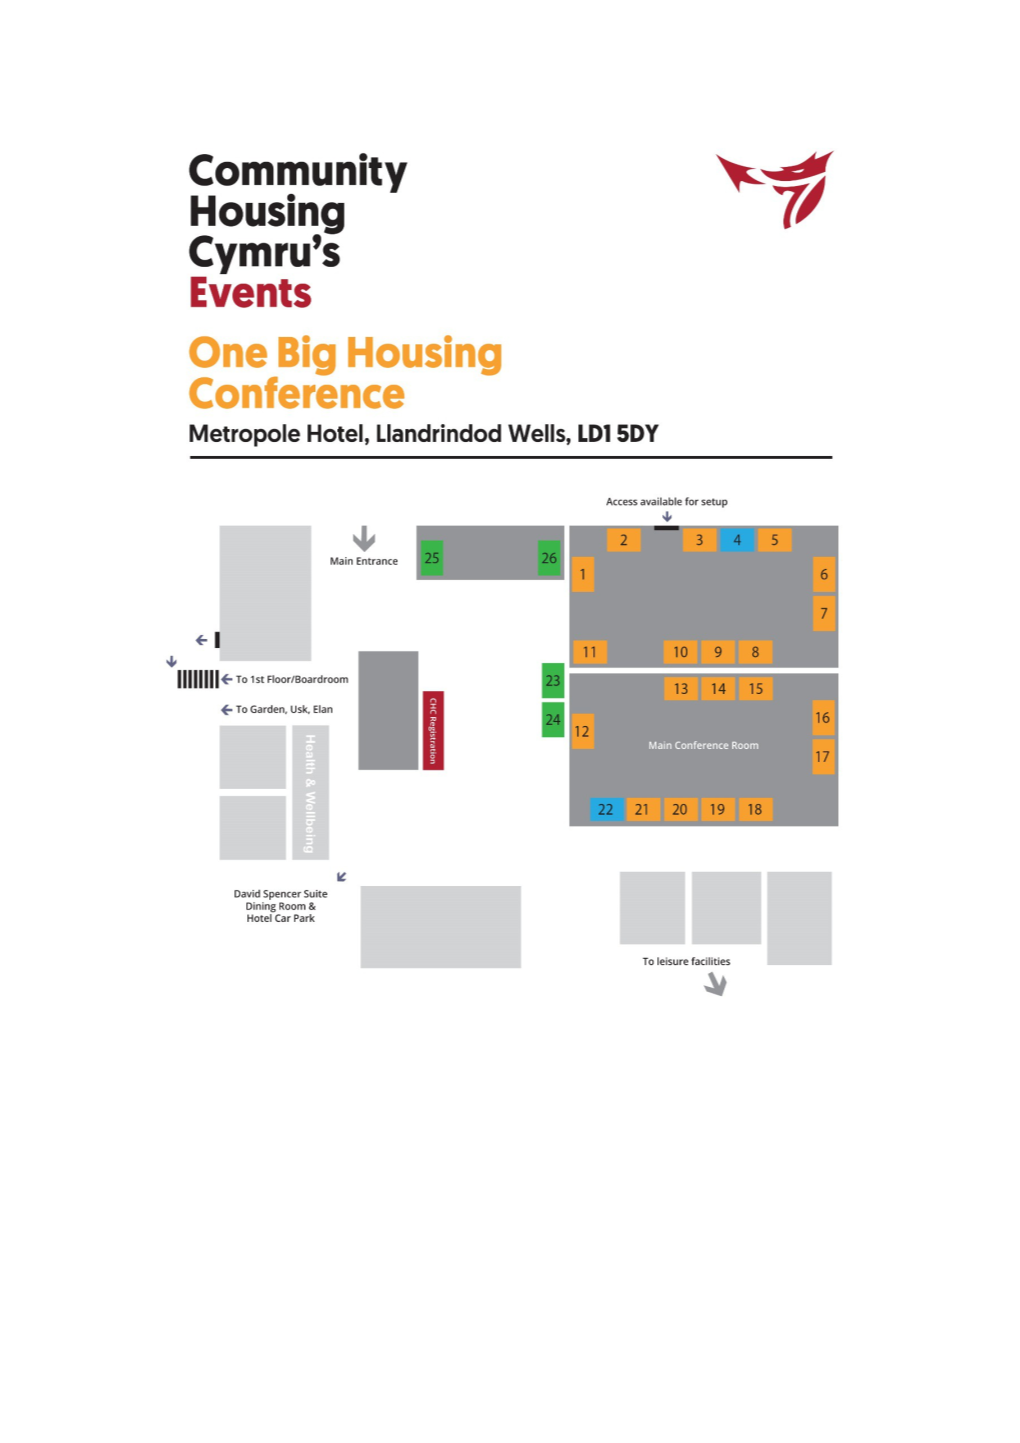 Stand 1: Warm Wales and Wales & West Utilities